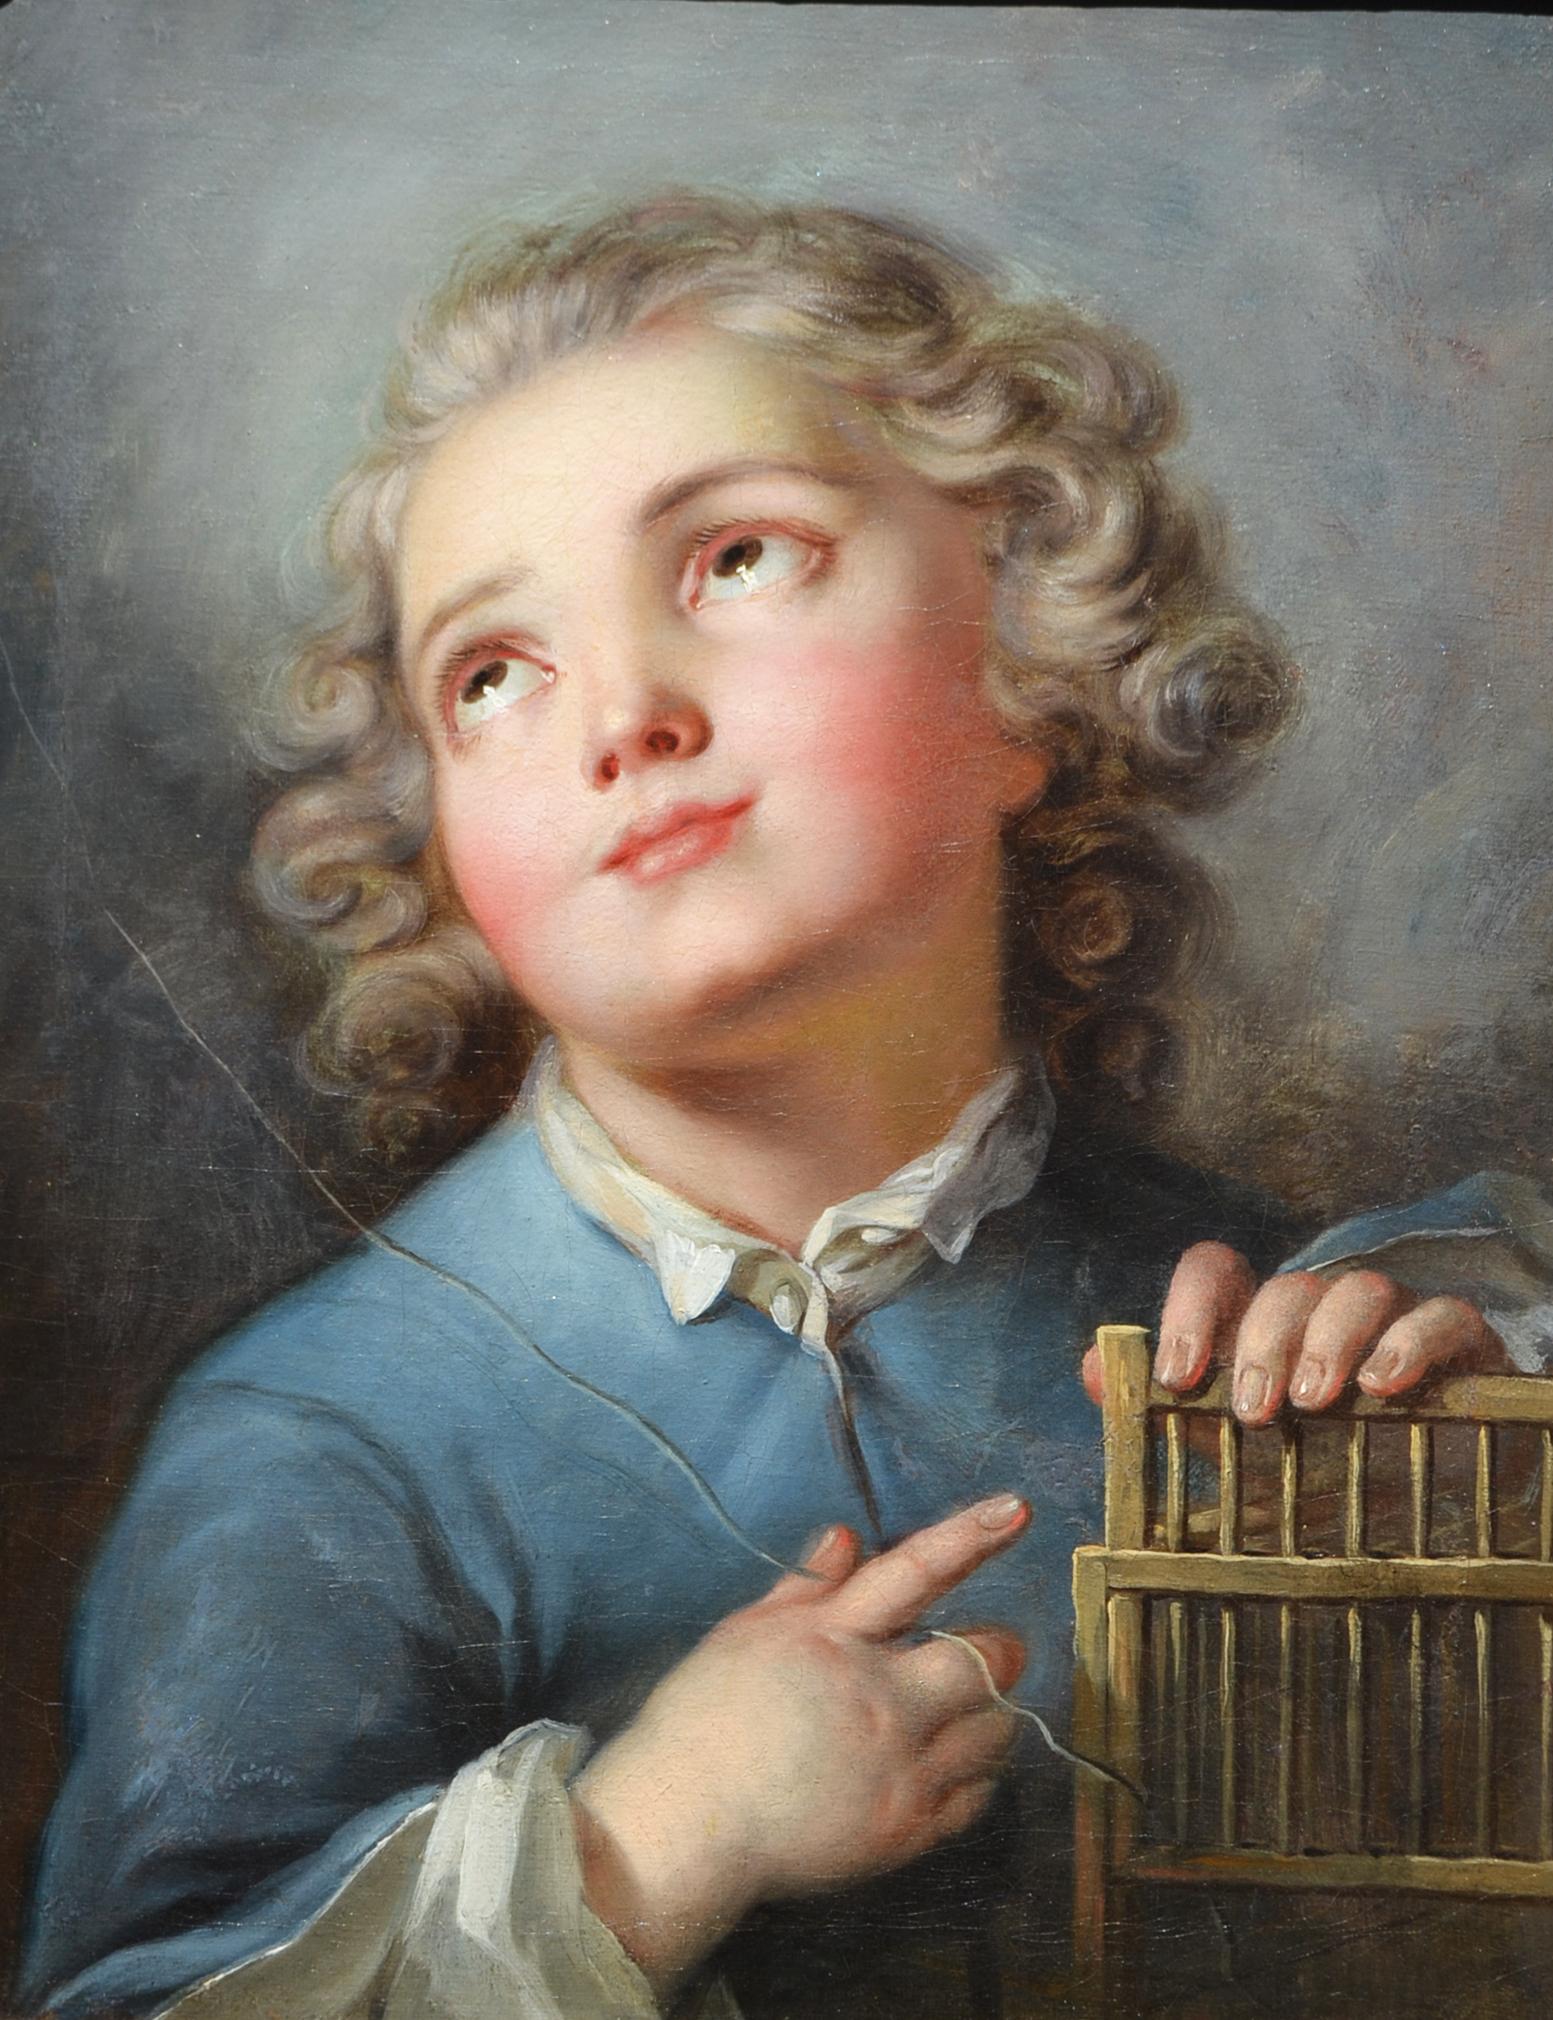 Portrait of a Young Boy with Birdcage